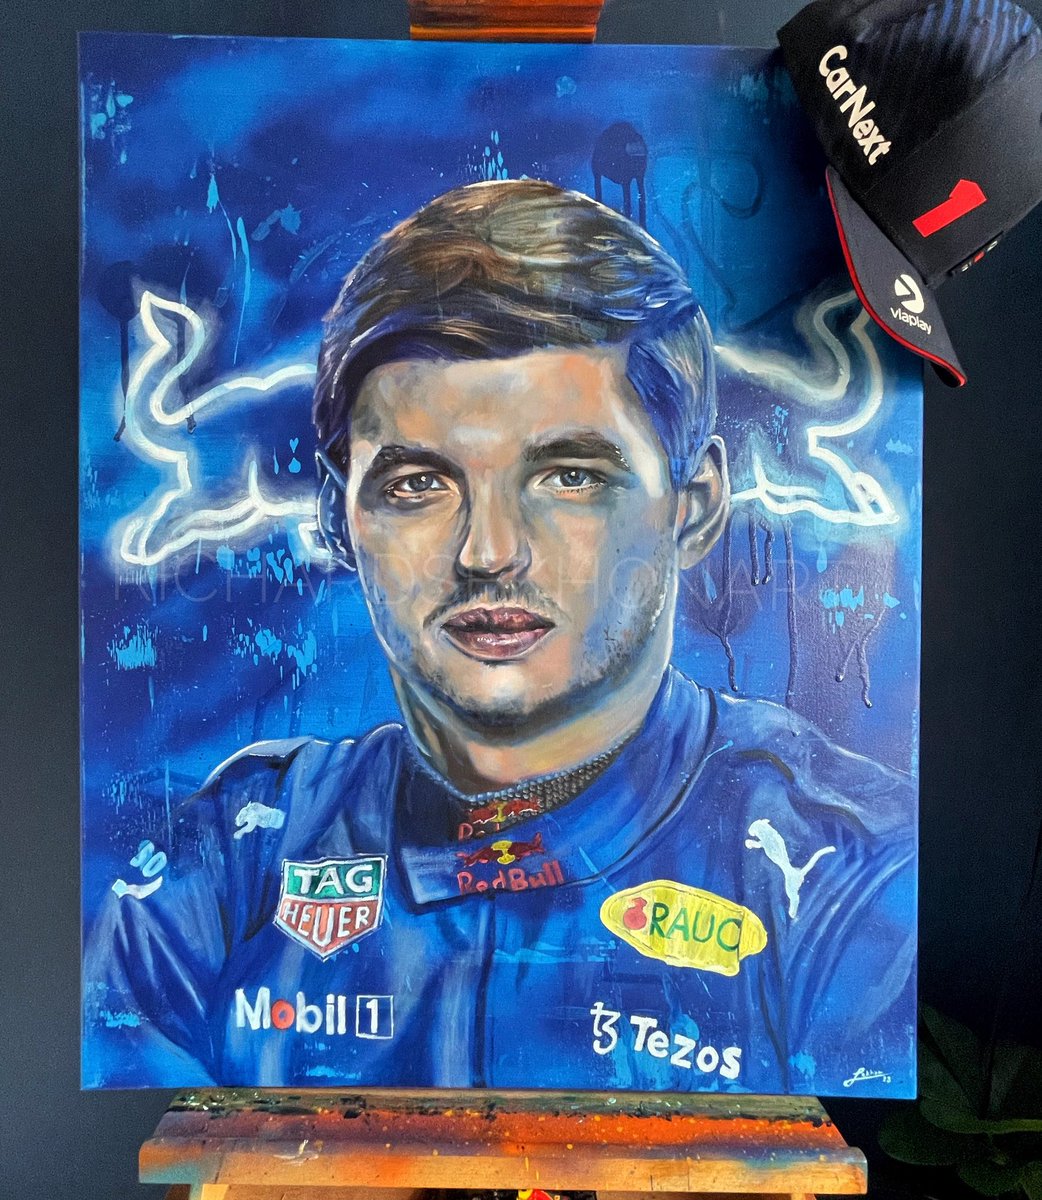 Who else? 🔥😅 Had to be a season opening win for Max Verstappen 🙌 My portrait of the dominant Dutch driver 🎨